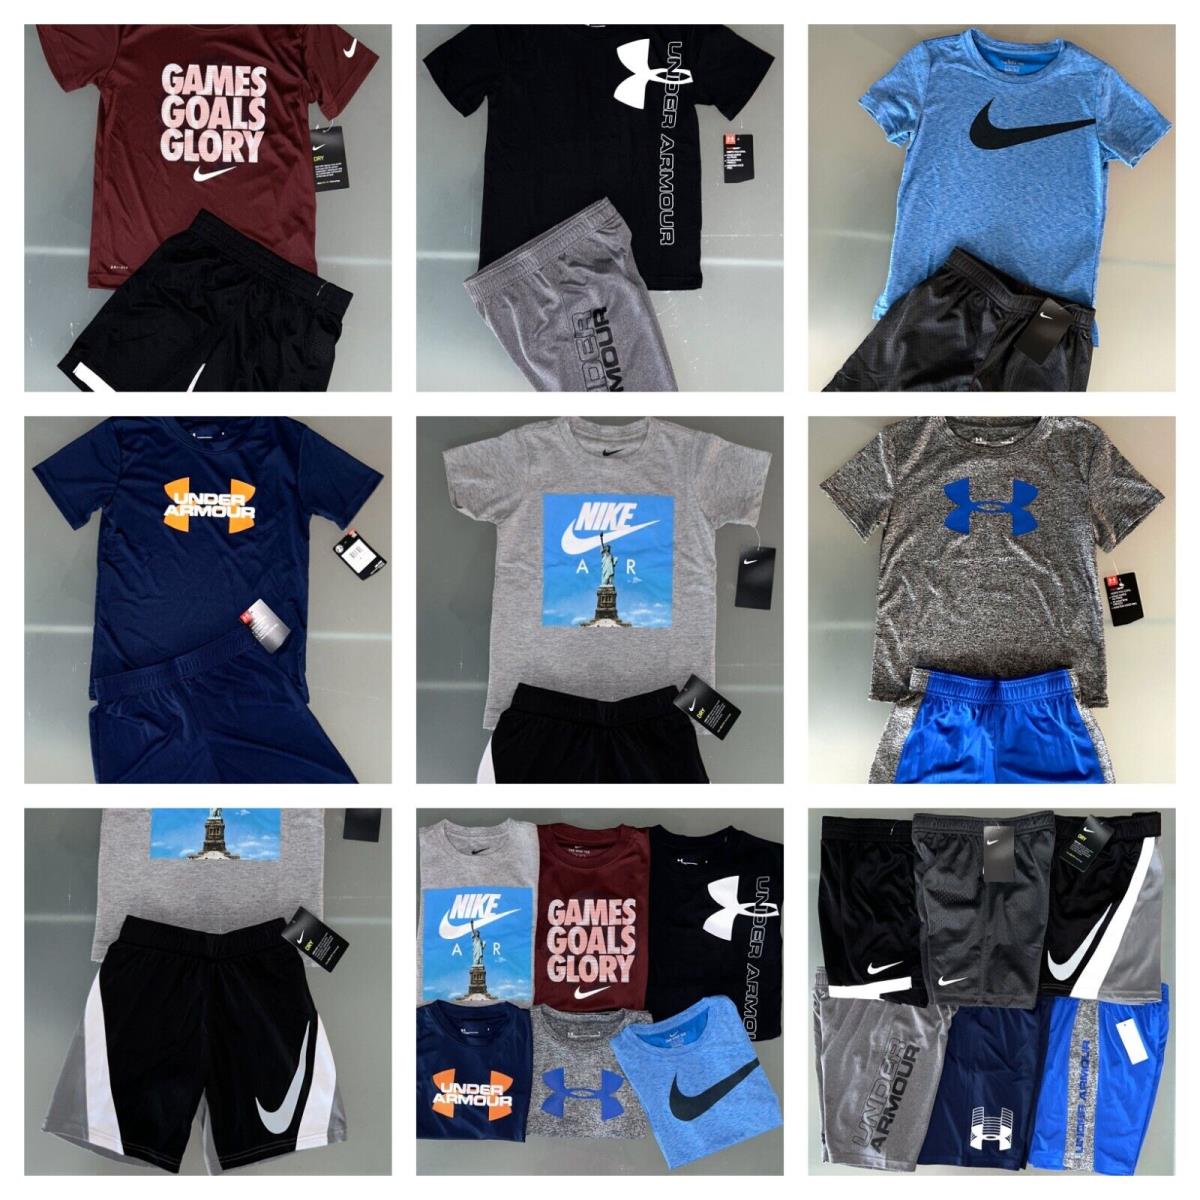 12 pc Lot Boys 6 Nike Under Armour Sports Sets Shorts T-shirts Tops Outfits